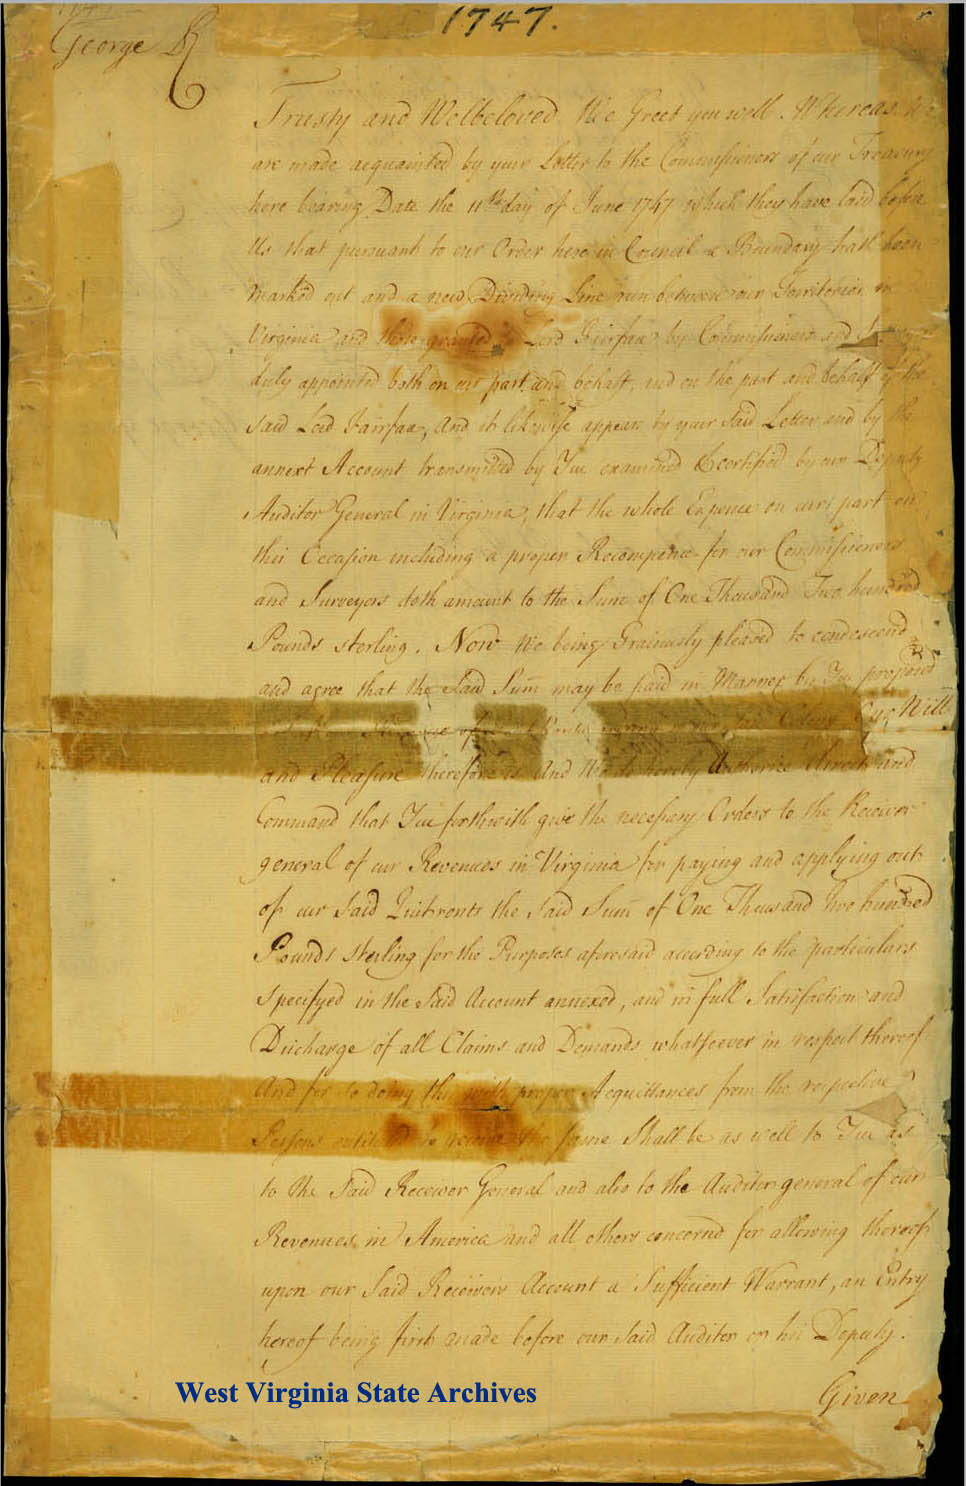 Papers related to the expense of running the boundary line to divide the Northern Neck land grant of Lord Fairfax, 1747. (Ms79-3))